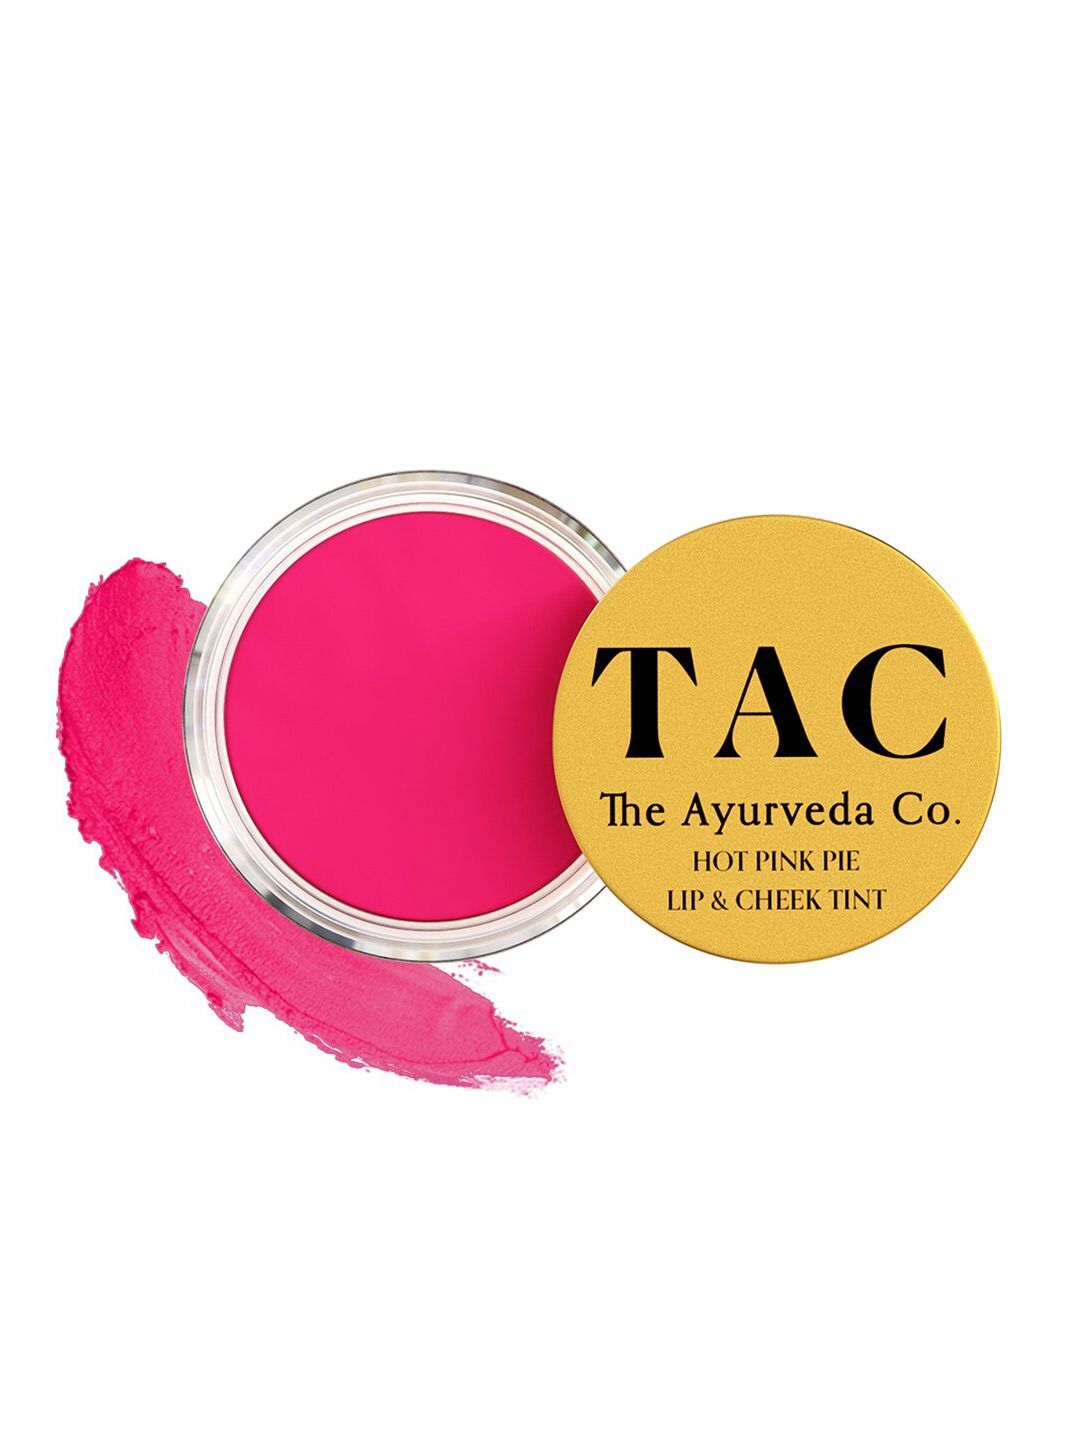 TAC - The Ayurveda Co. Lip & Cheek Tint With Shea Butter - Hot Pink Price in India